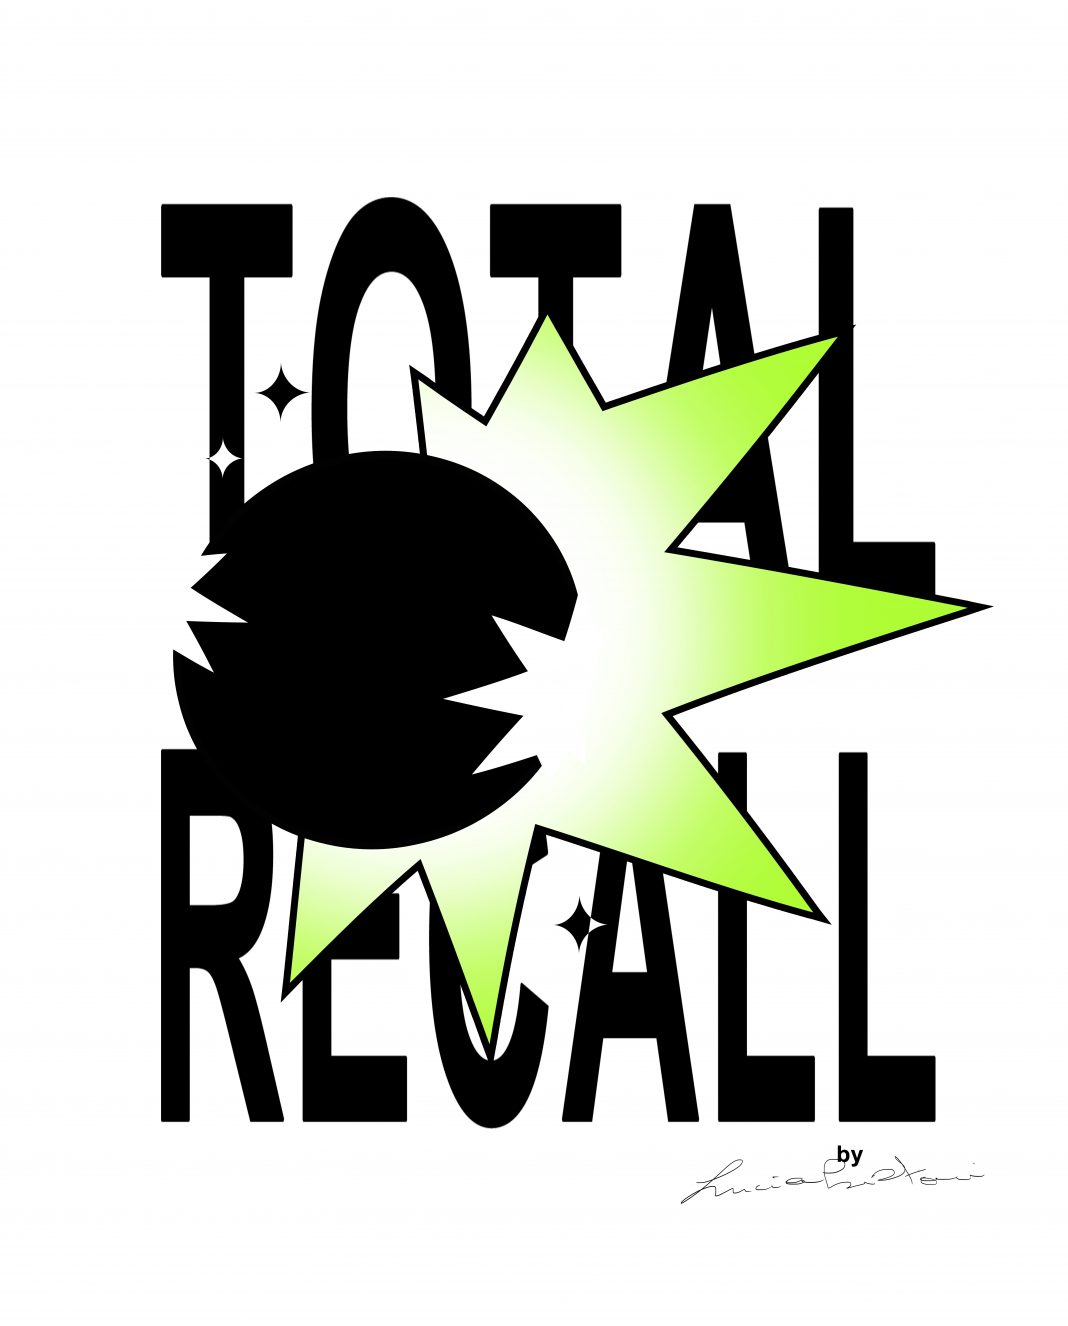 Total Recall. Community Art Project for Charityhttps://www.exibart.com/repository/media/formidable/11/Logo-TotalRecall-Design-by-Lucia-Cristiani-1068x1326.jpg